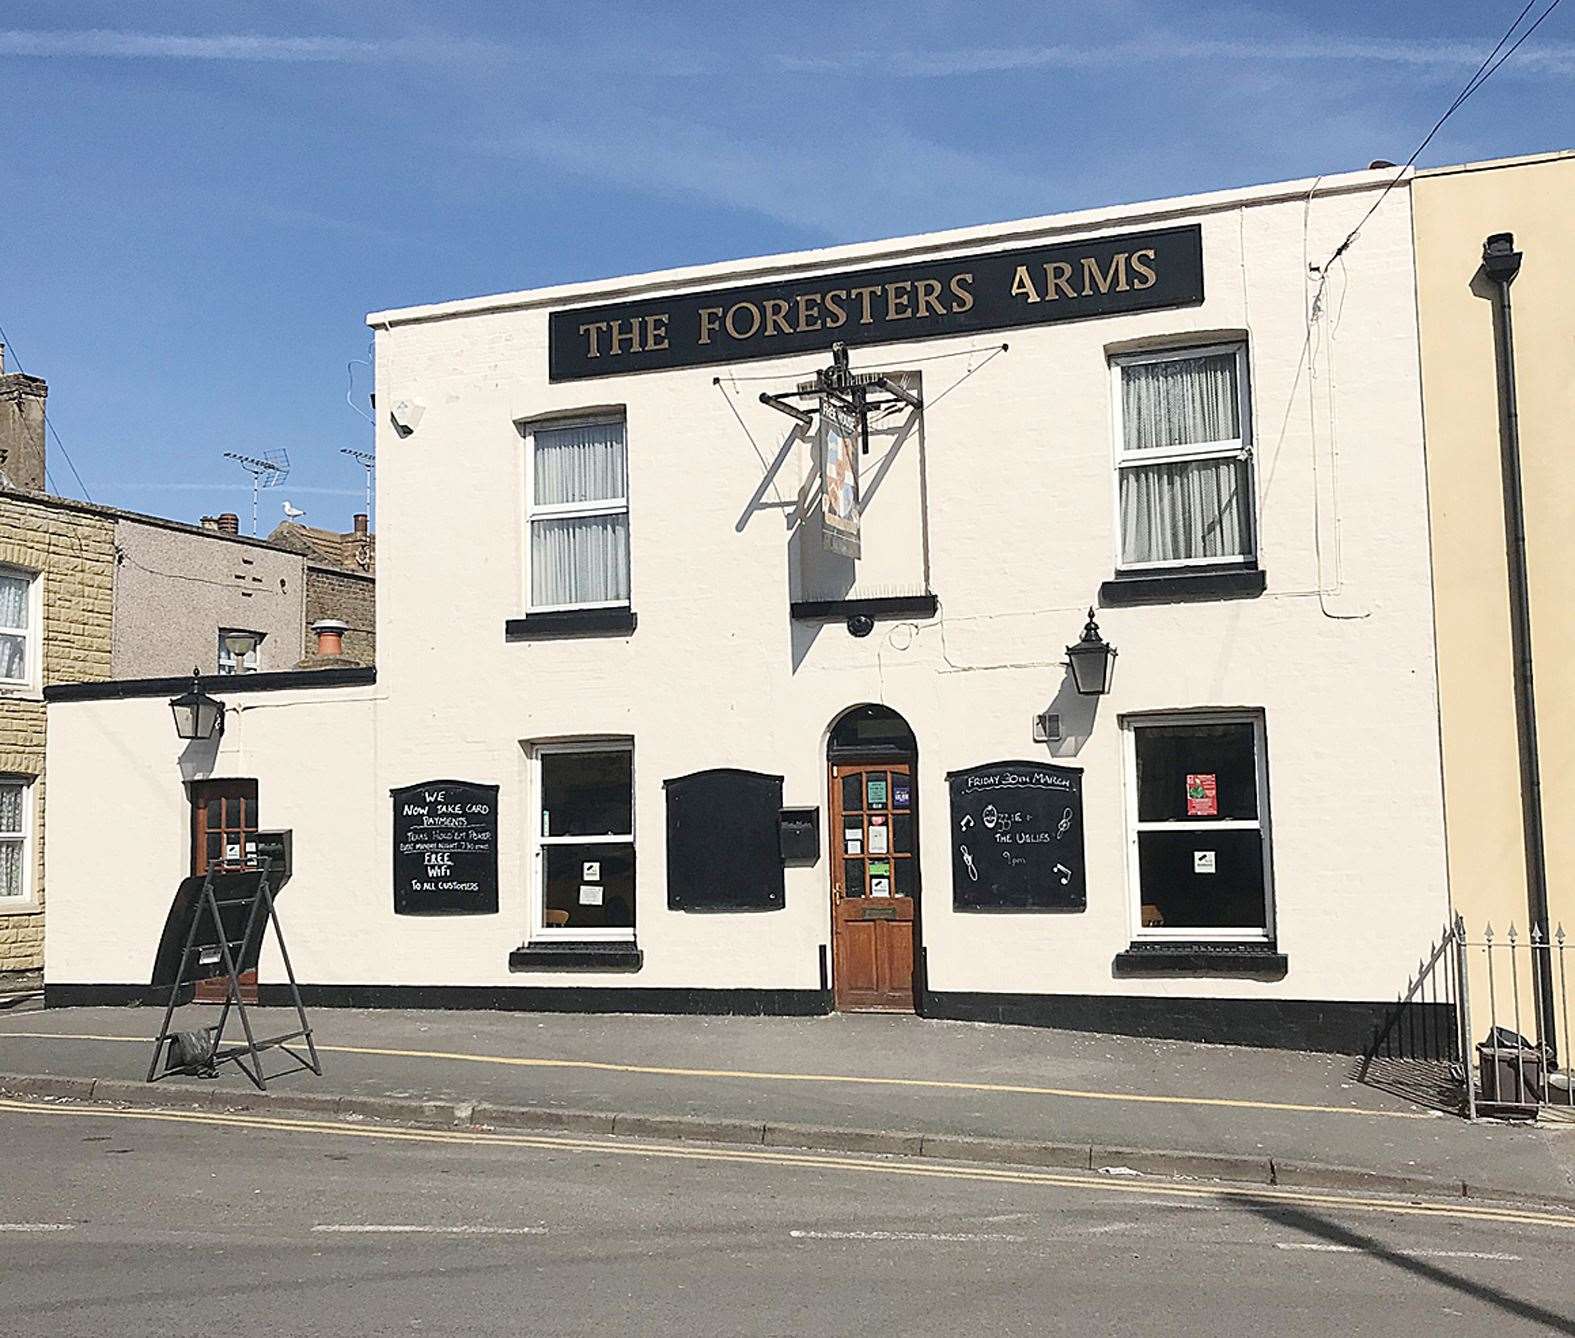 The Foresters Arms in Ramsgate will have a two-storey rear extension built and be turned into a three-bed property and a two-bed home